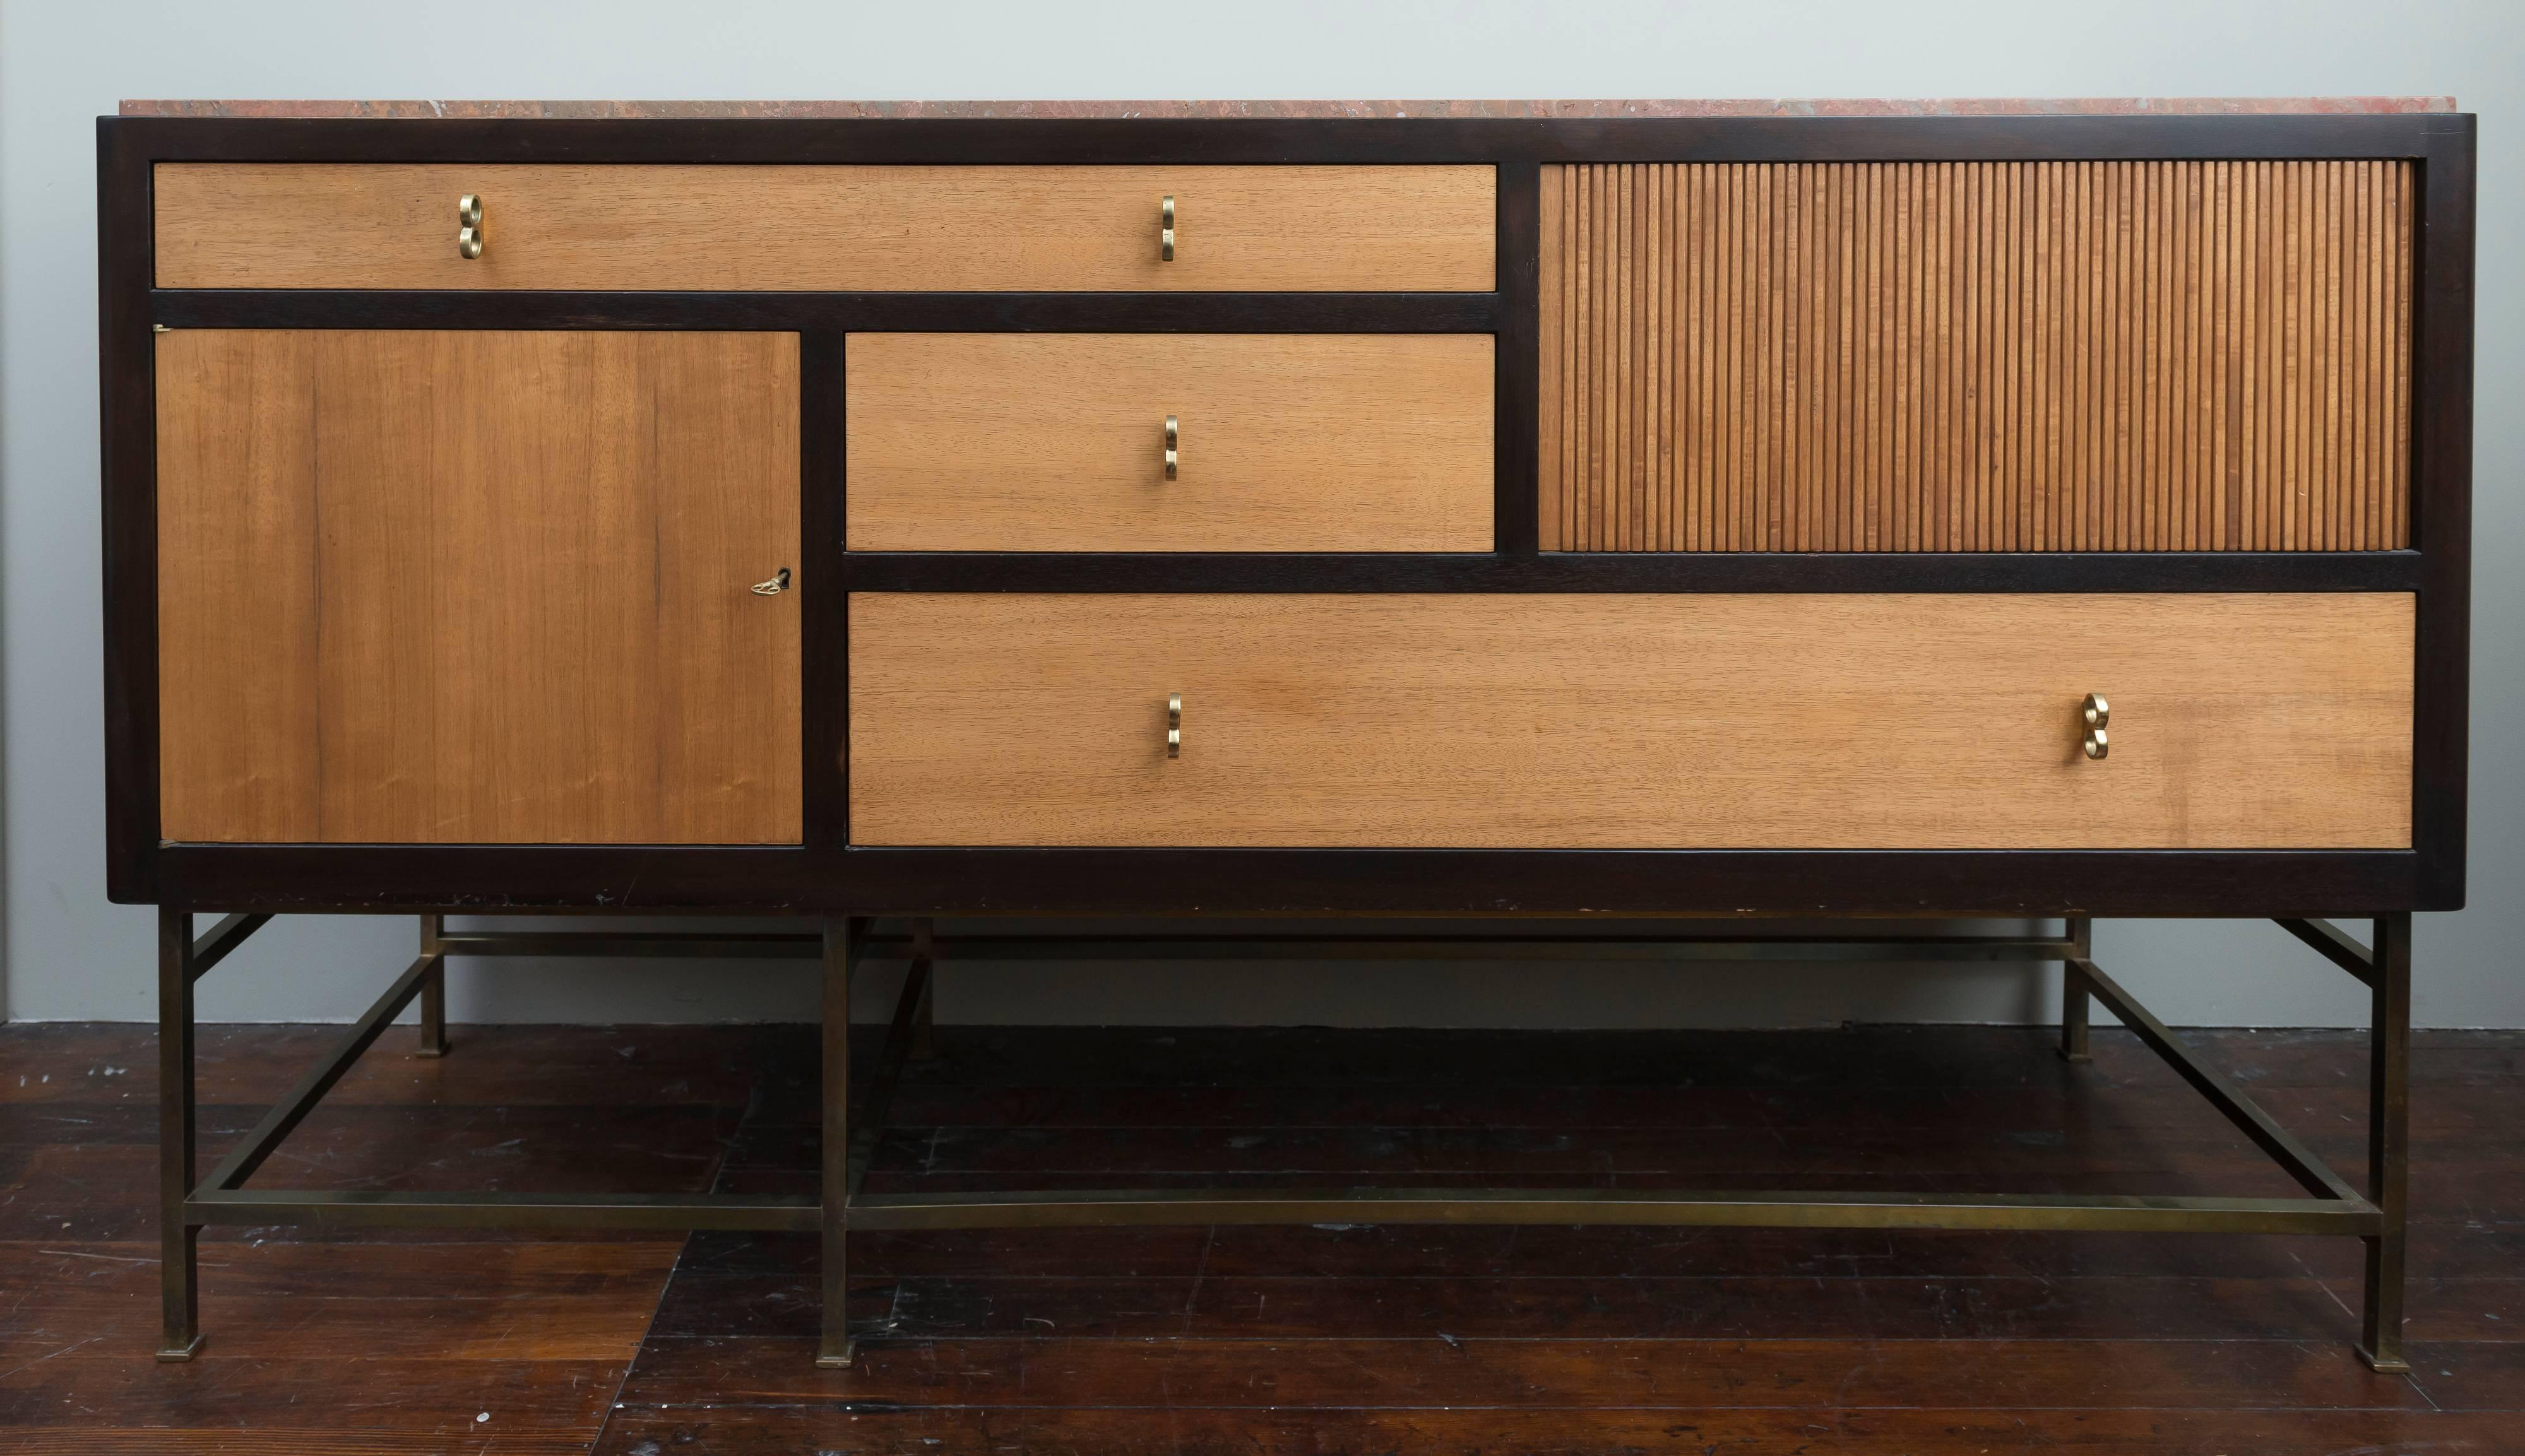 Large and impressive Edward Wormley design sideboard for Dunbar Furniture co. Model #5465. In my opinion his best designed and sophisticated sideboard or credenza for Dunbar. Made from dark stained mahogany and striking Tawi wood doors and drawers